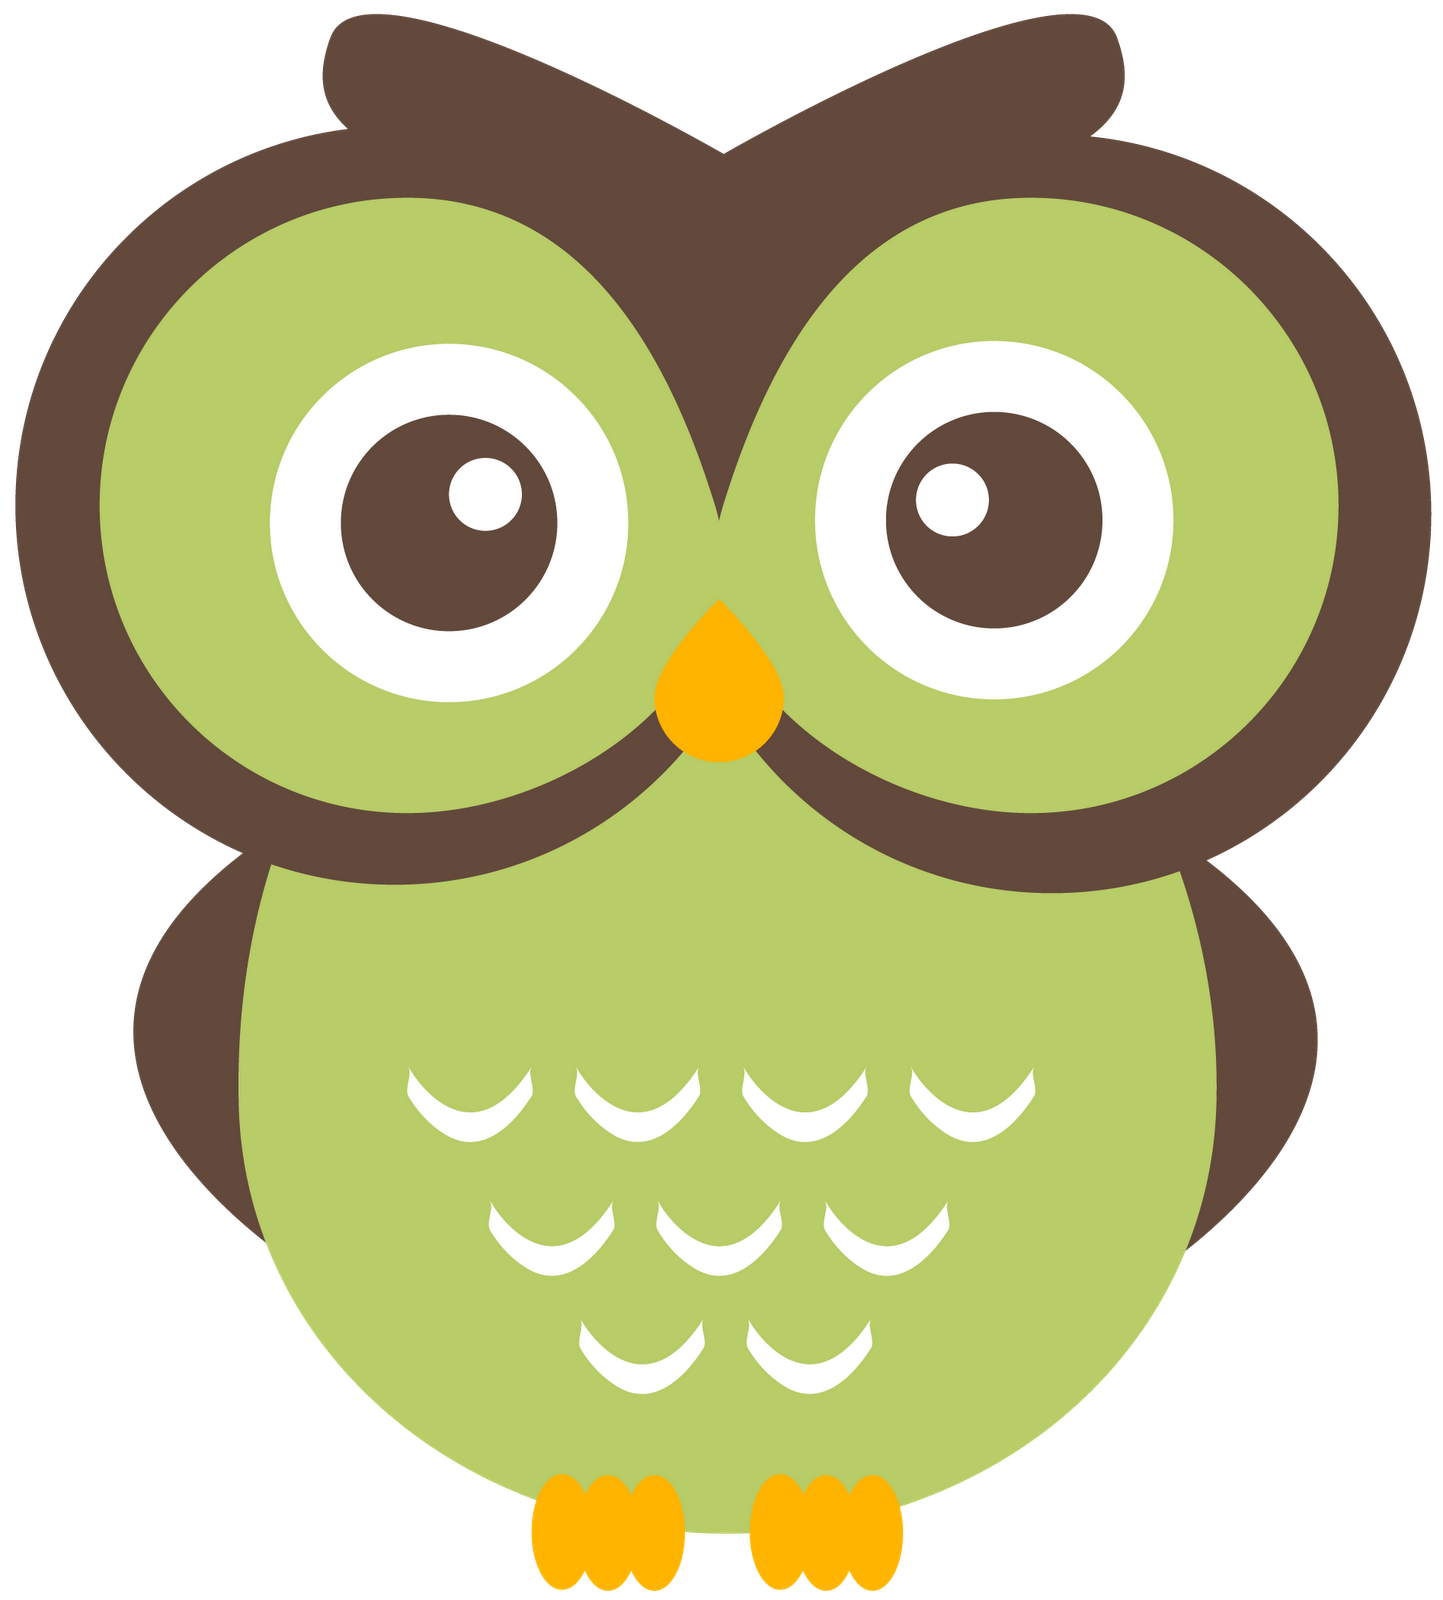 Owl Clipart, Transparent PNG Clipart Images Free Download - ClipartMax ...